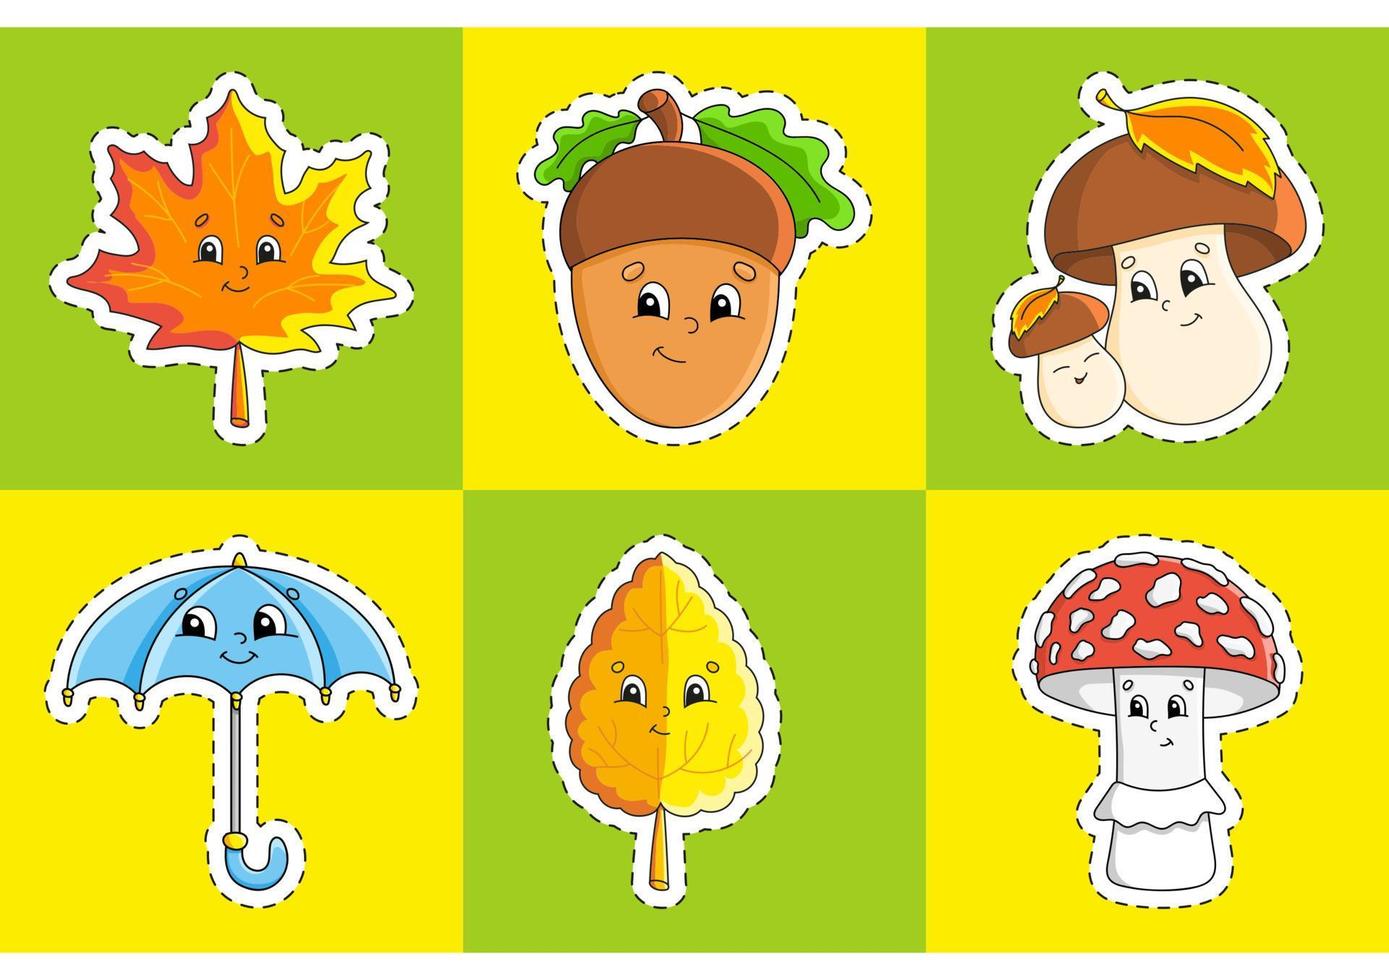 Sticker with contour. cartoon character. Colorful vector illustration. Isolated on color background. Template for your design. Autumn theme.